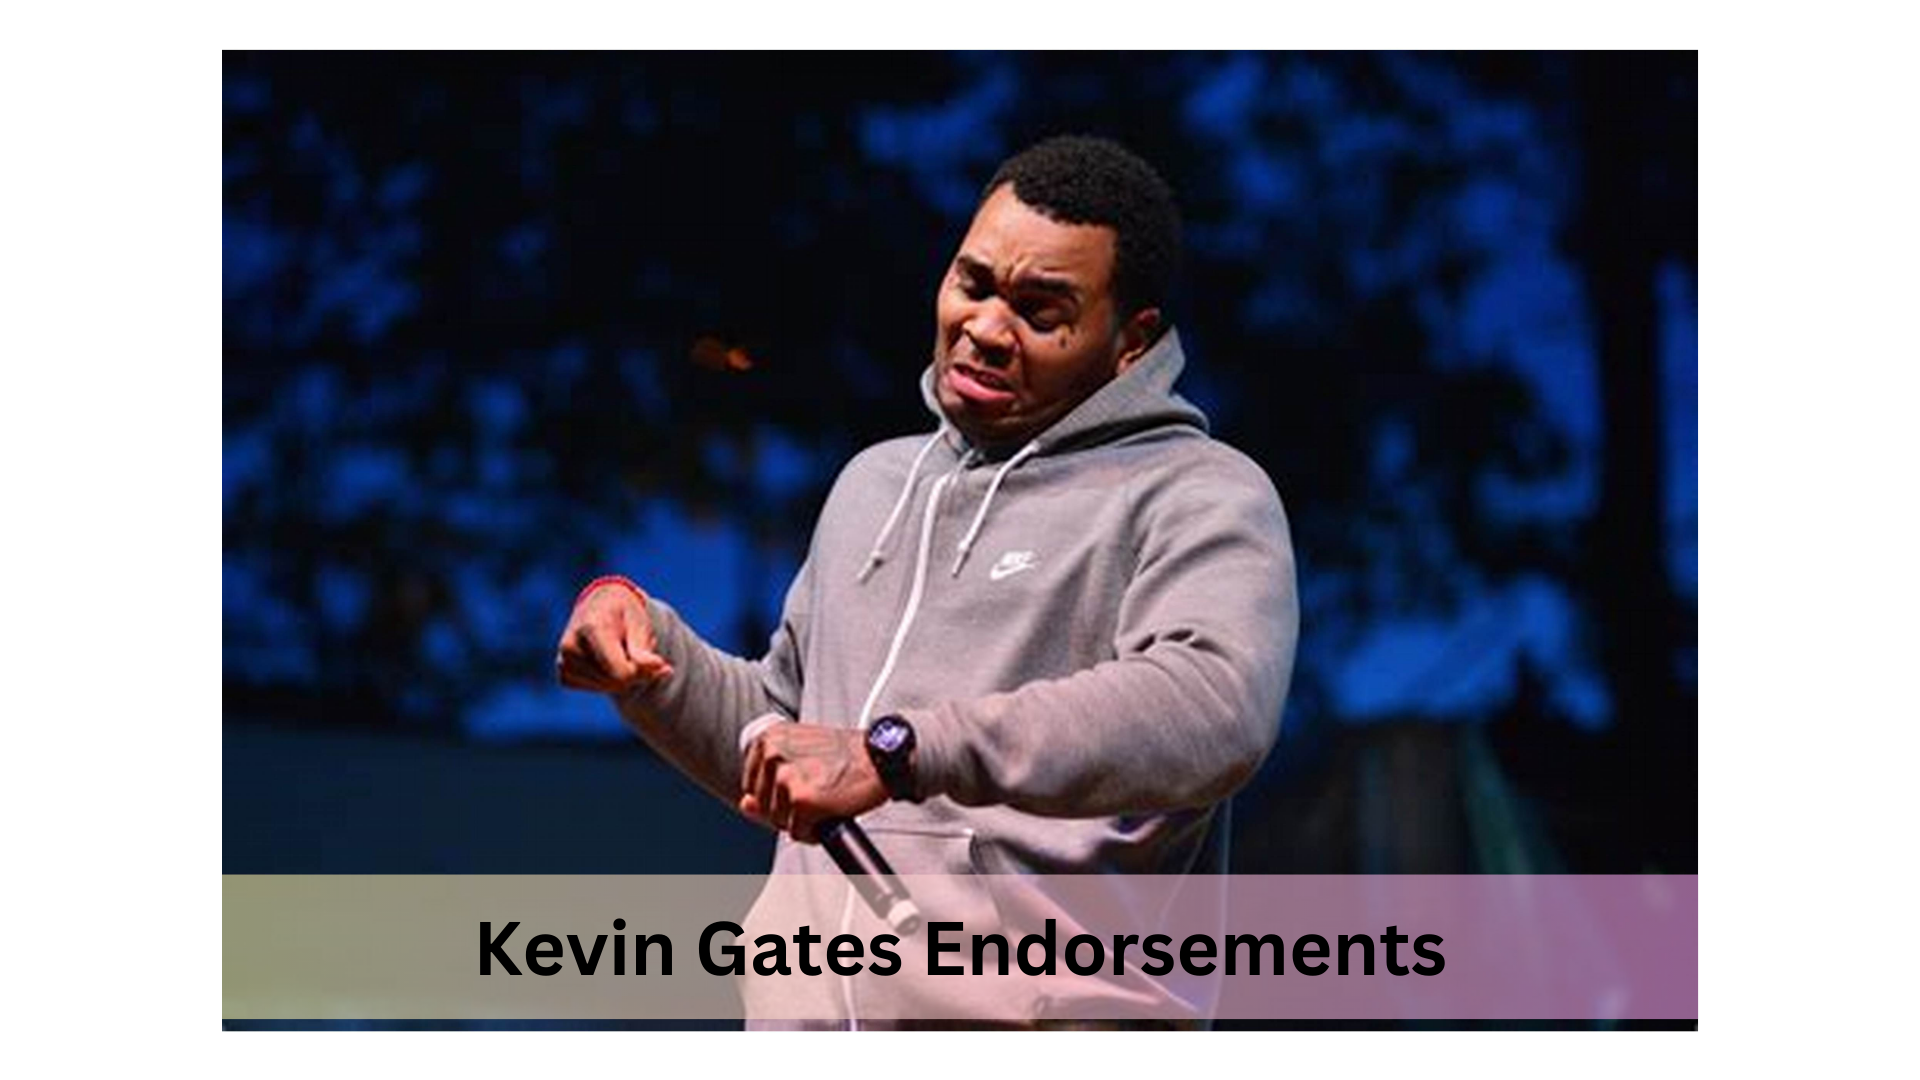 Kevin Gates Awards and Achievements